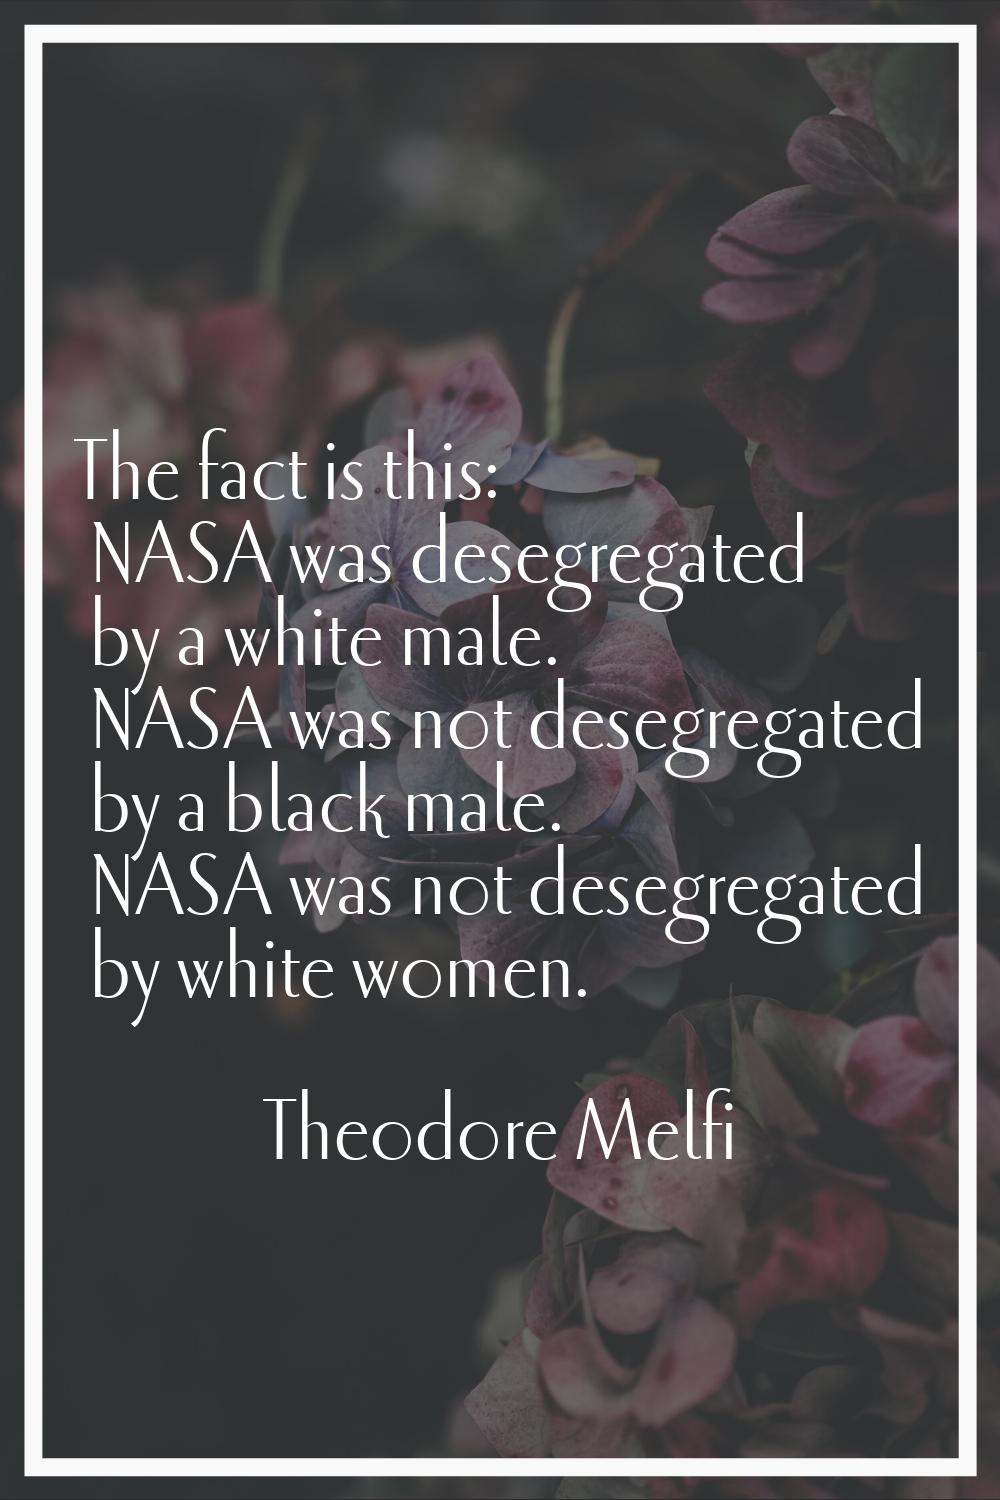 The fact is this: NASA was desegregated by a white male. NASA was not desegregated by a black male.